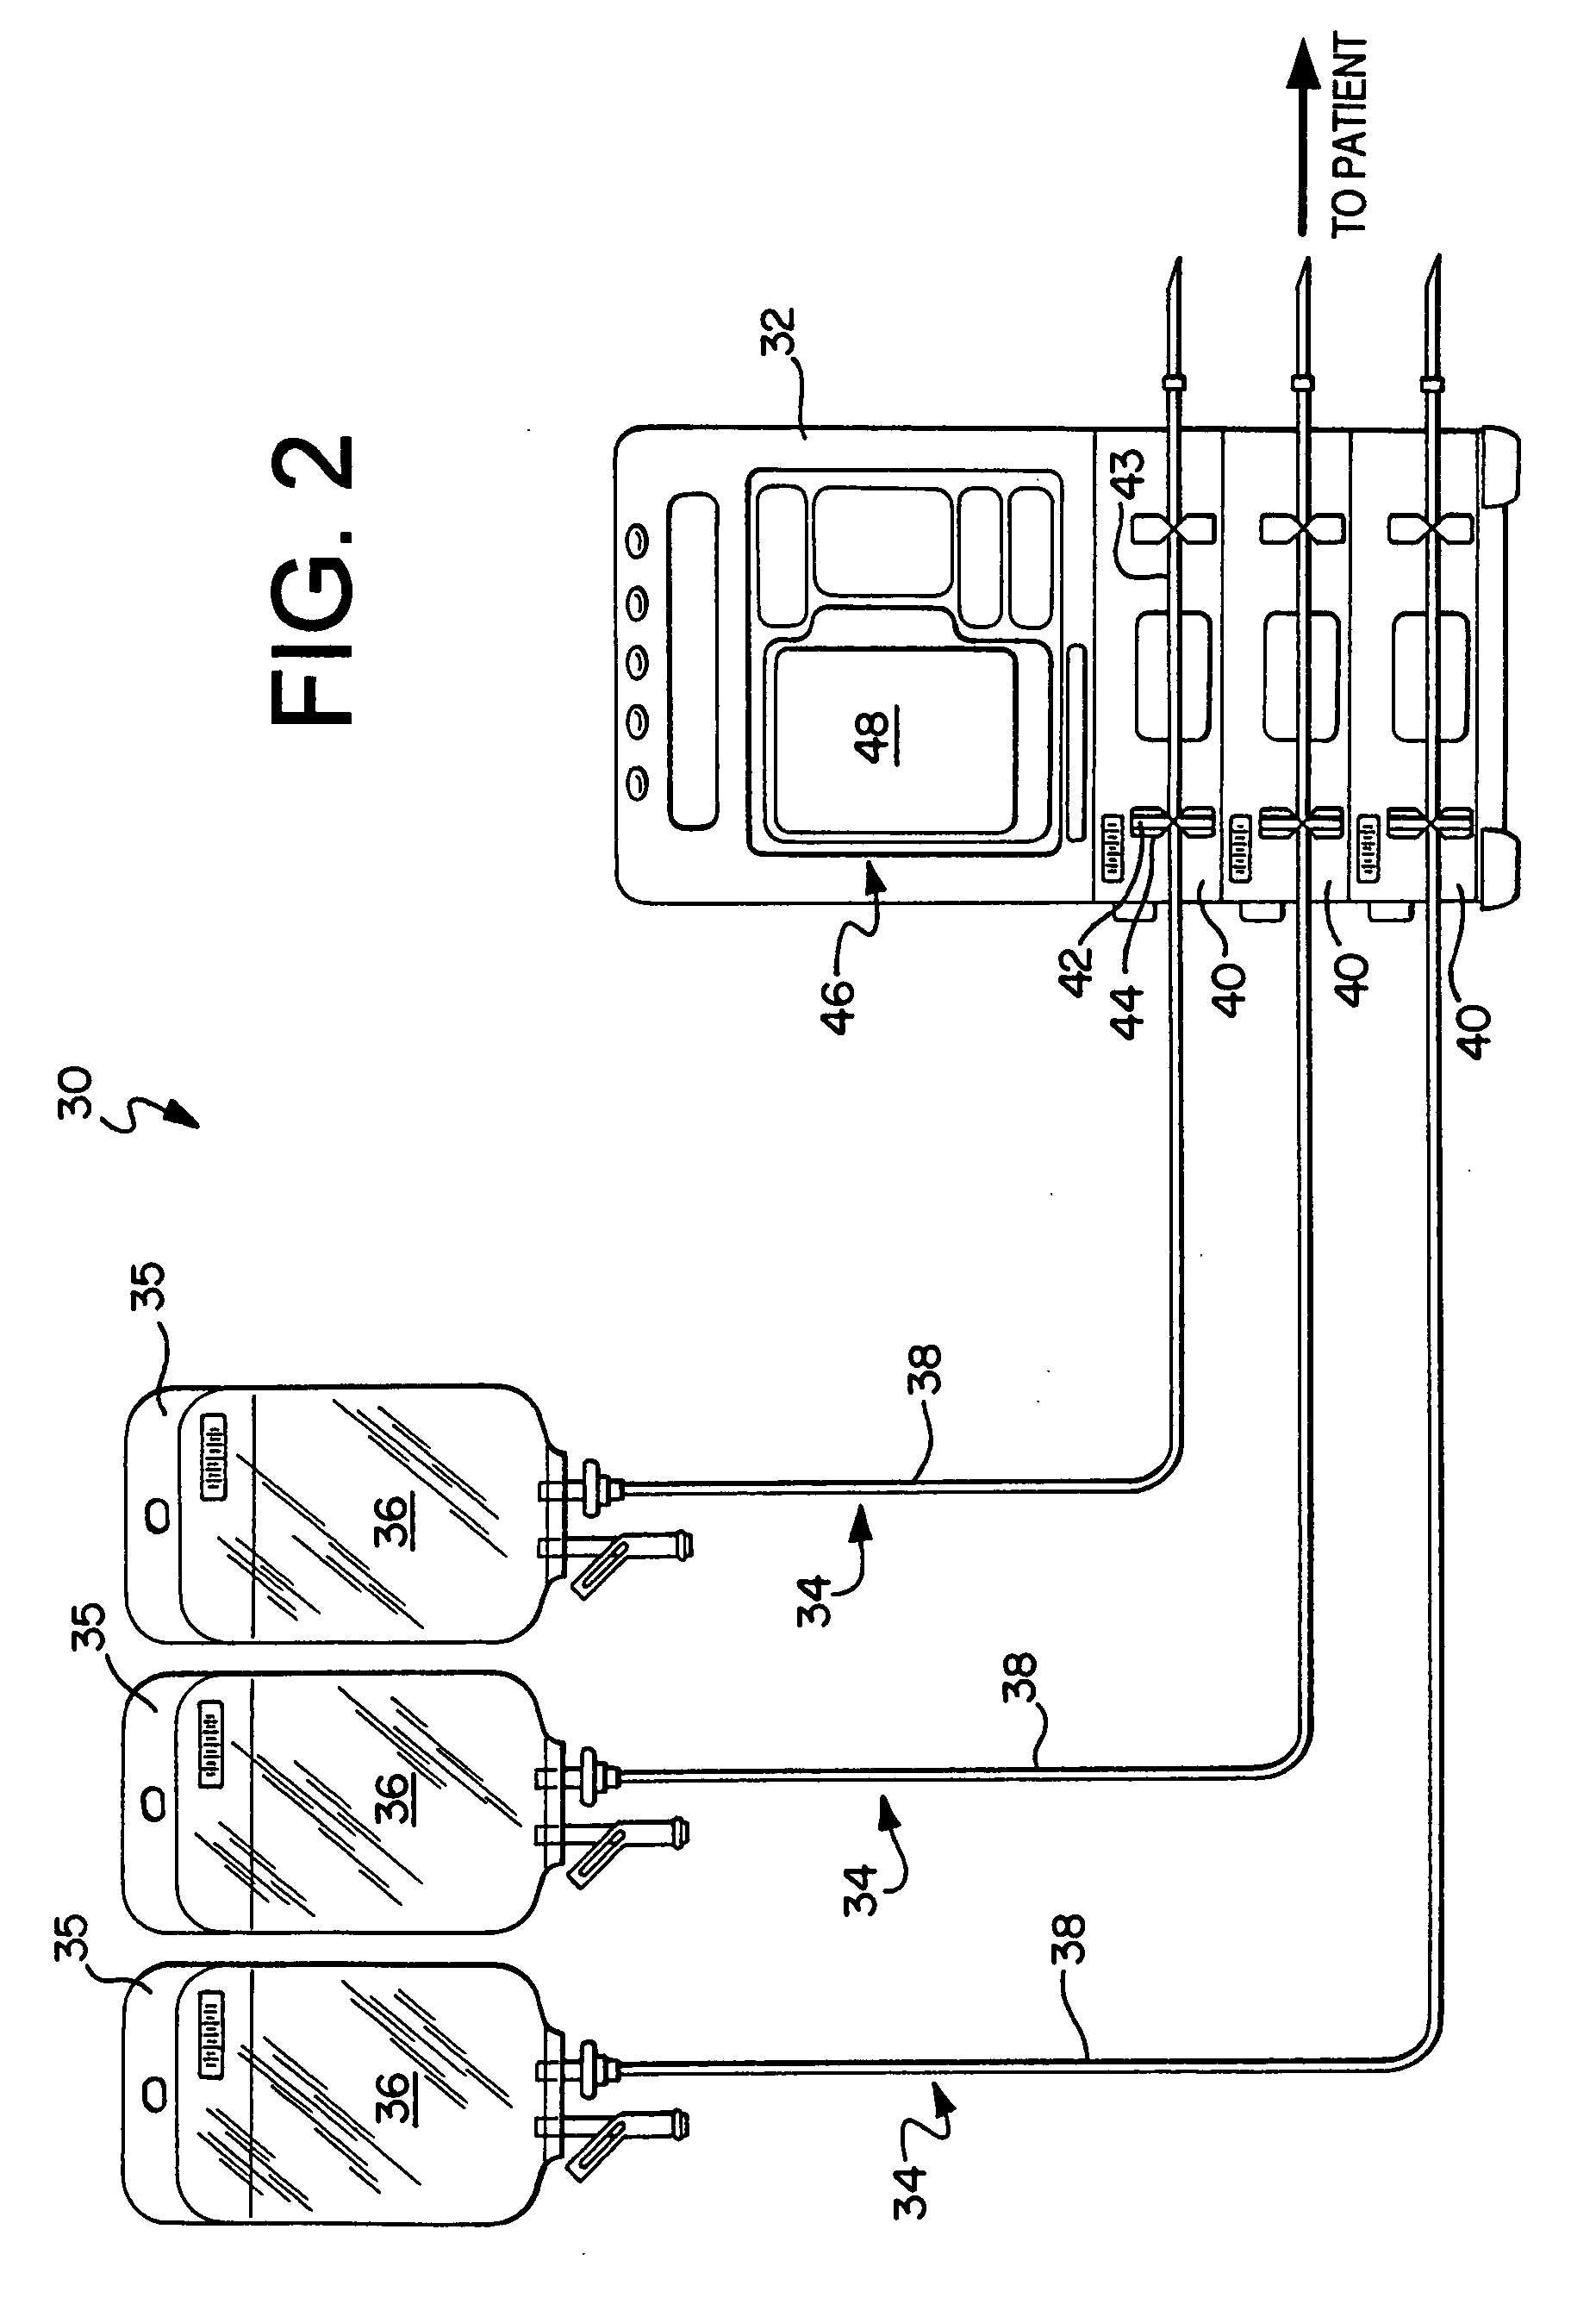 Medical device configuration based on recognition of identification information